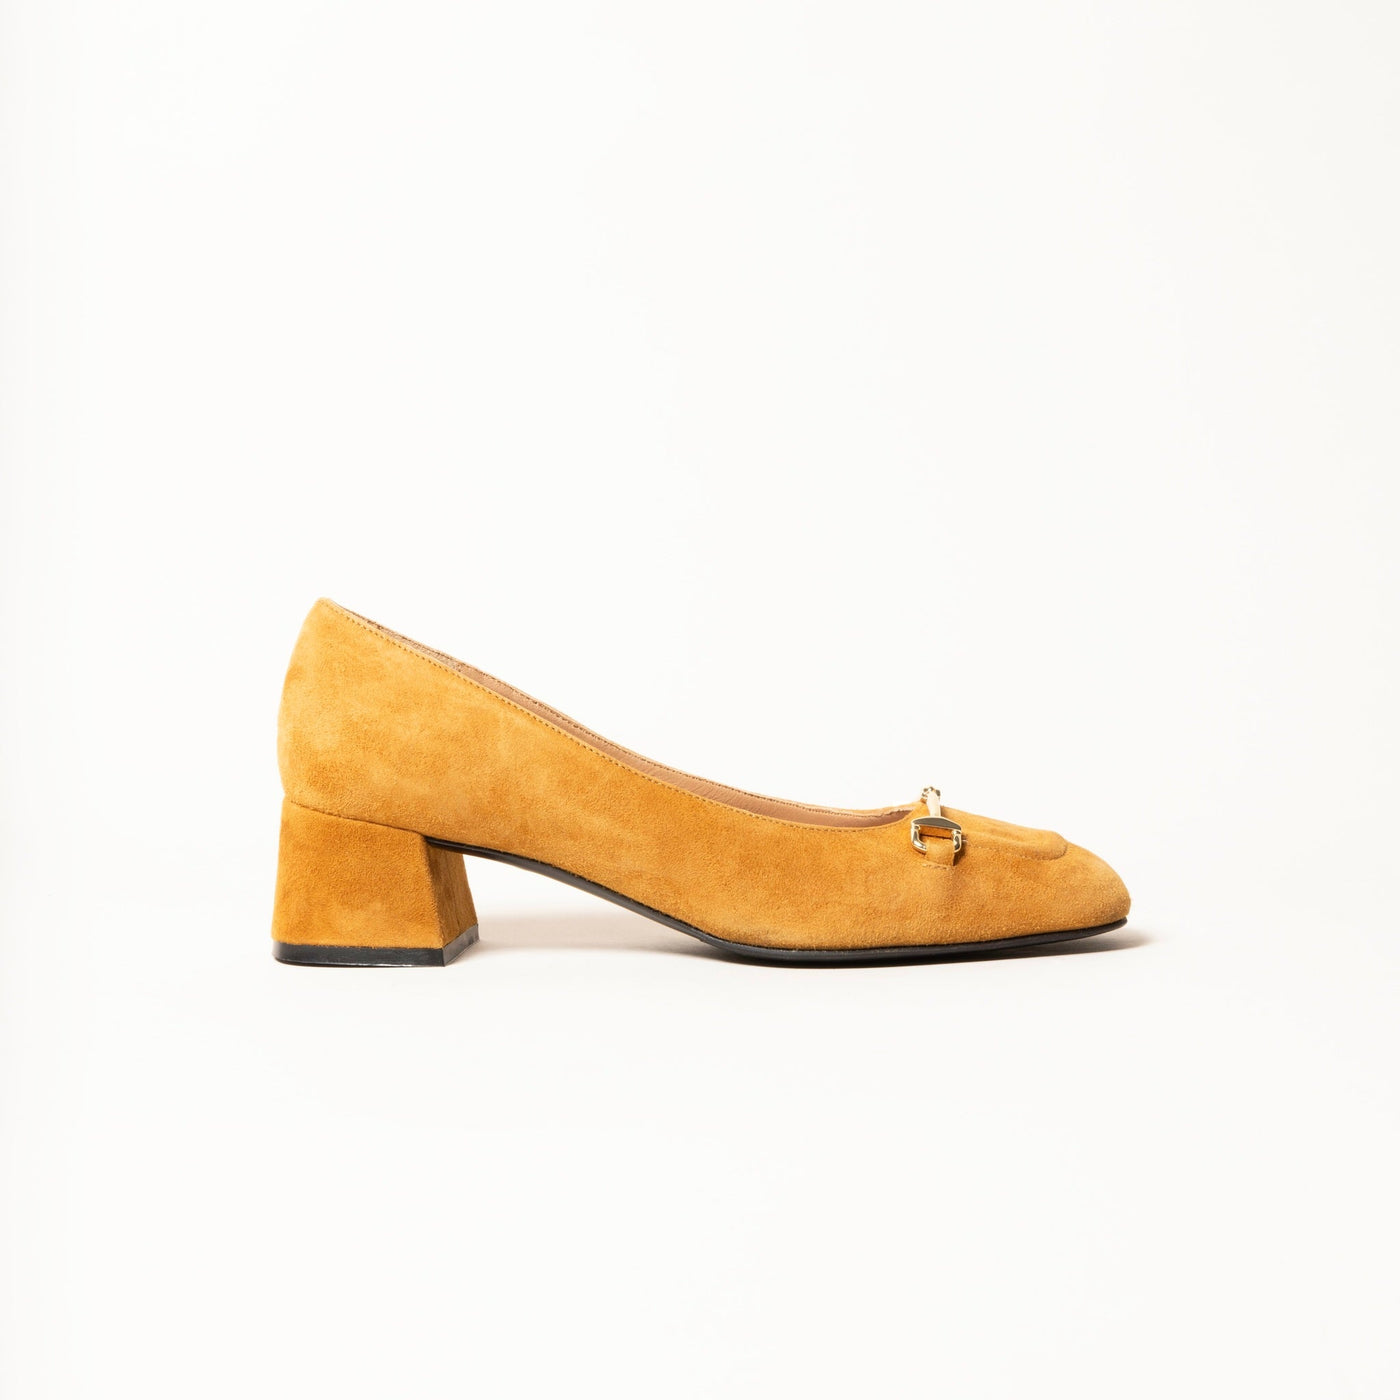 Heeled pump made from soft suede leather, featuring a square-shaped toe with a gold metallic horse-bit buckle